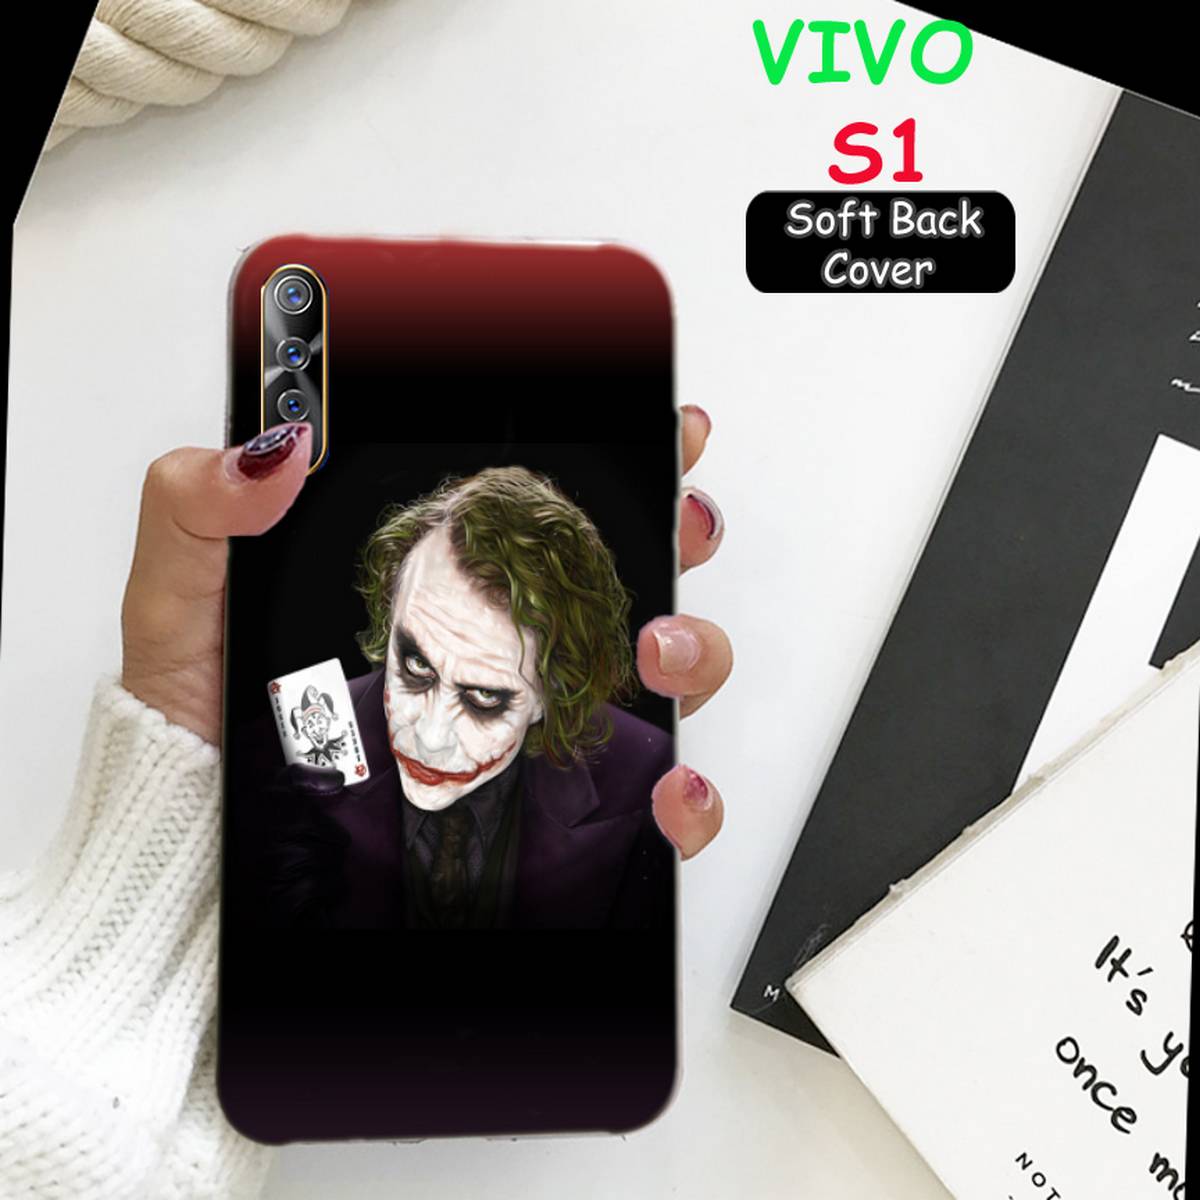 Vivo S1 Pouch Joker 2gud Soft Case Cover Pouch Buy Online At Best Prices In Pakistan Daraz Pk